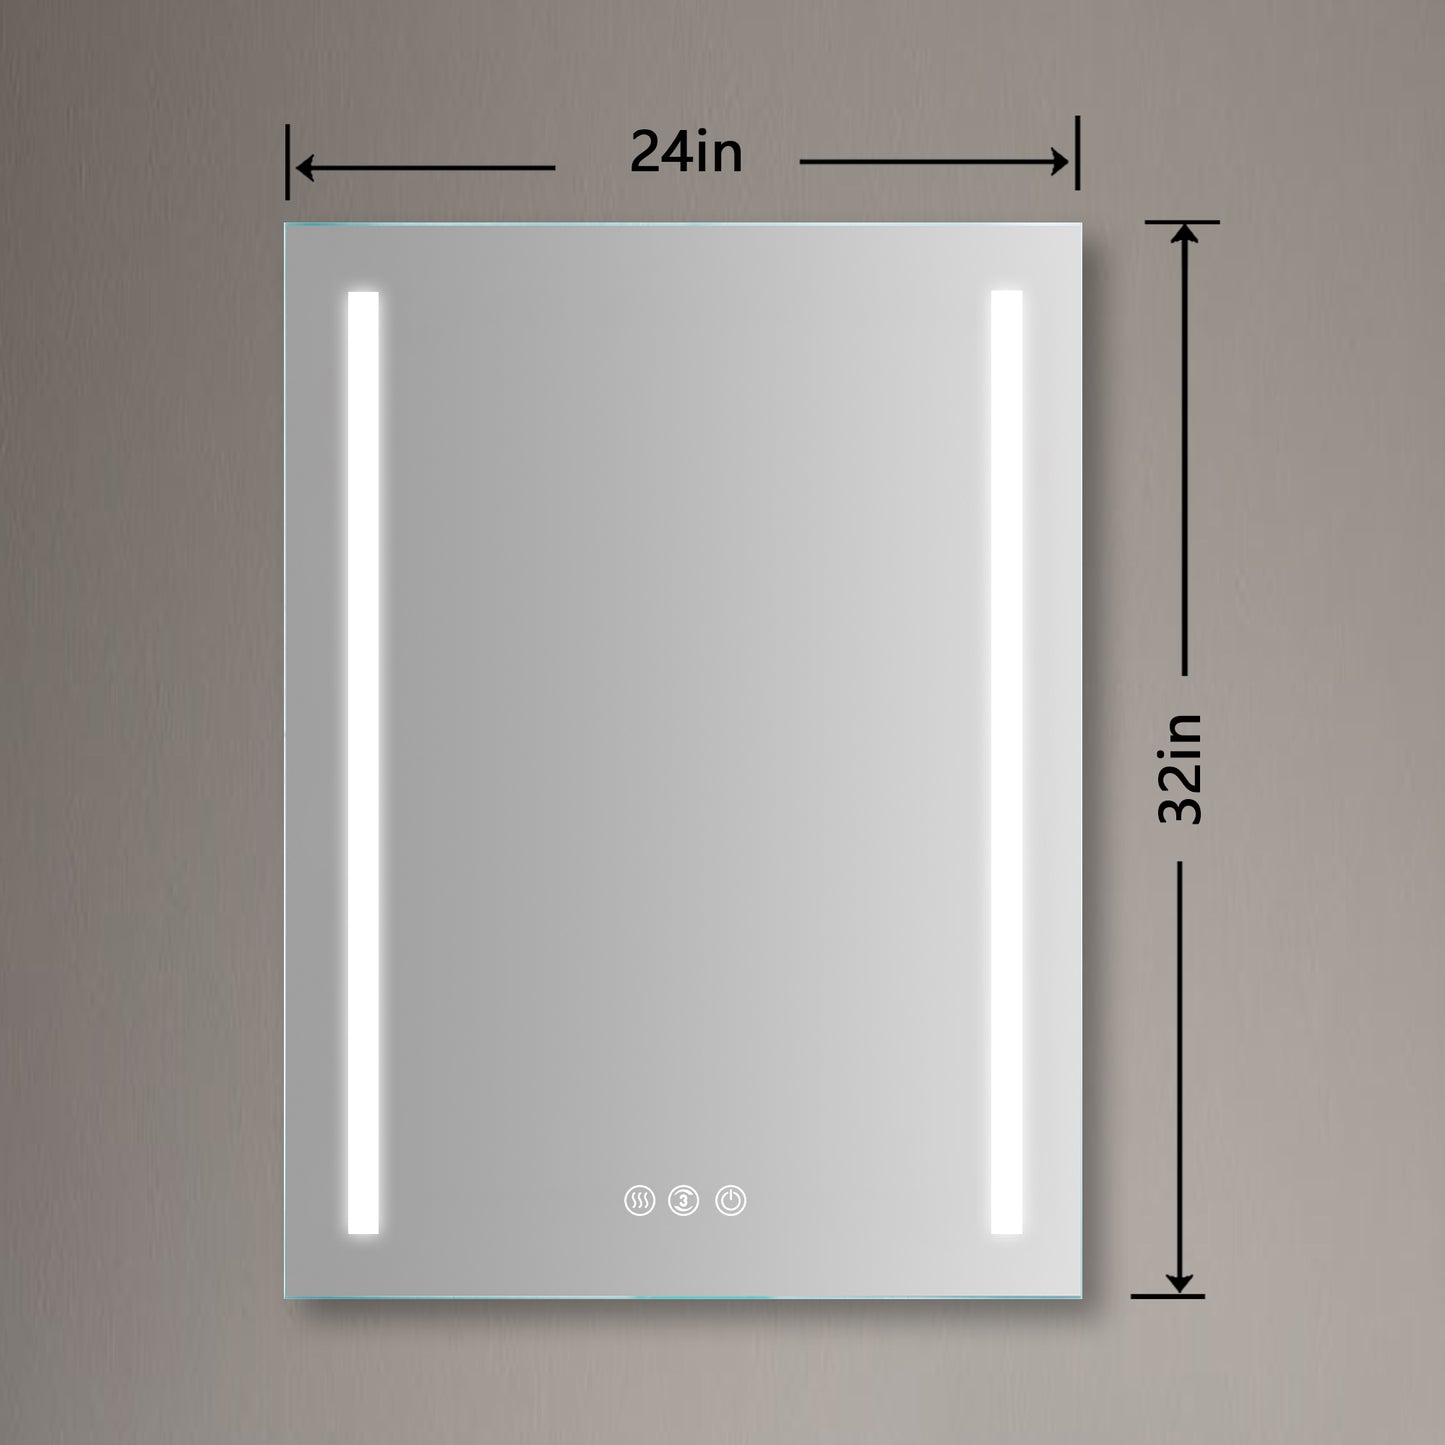 LED Bathroom Mirror with Light, 24 x 32 Inch Dimmable Anti-Fog Wall Mounted Vanity Mirror, CRI 90+, Color Temperature 5000K (Horizontal/Vertical Install)